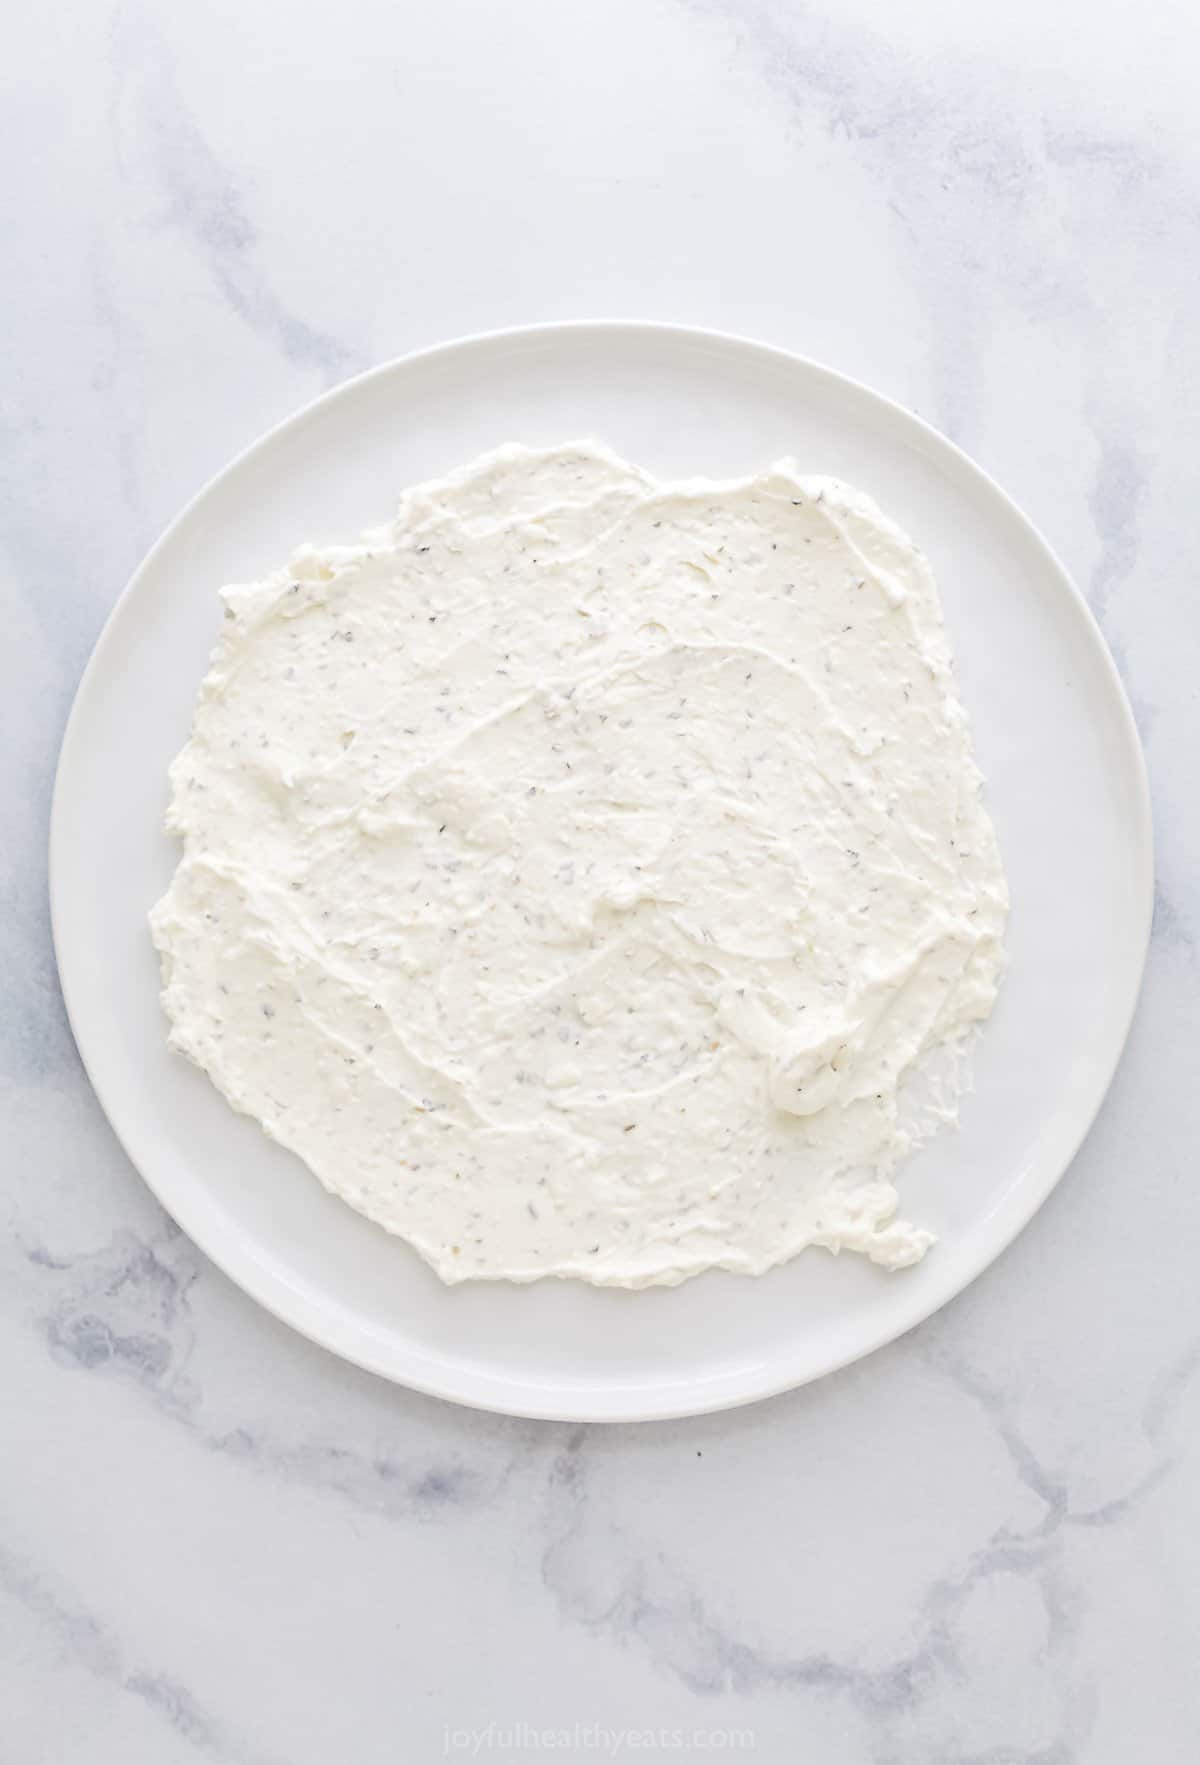 Whipped feta spread onto a large white plate in an even layer